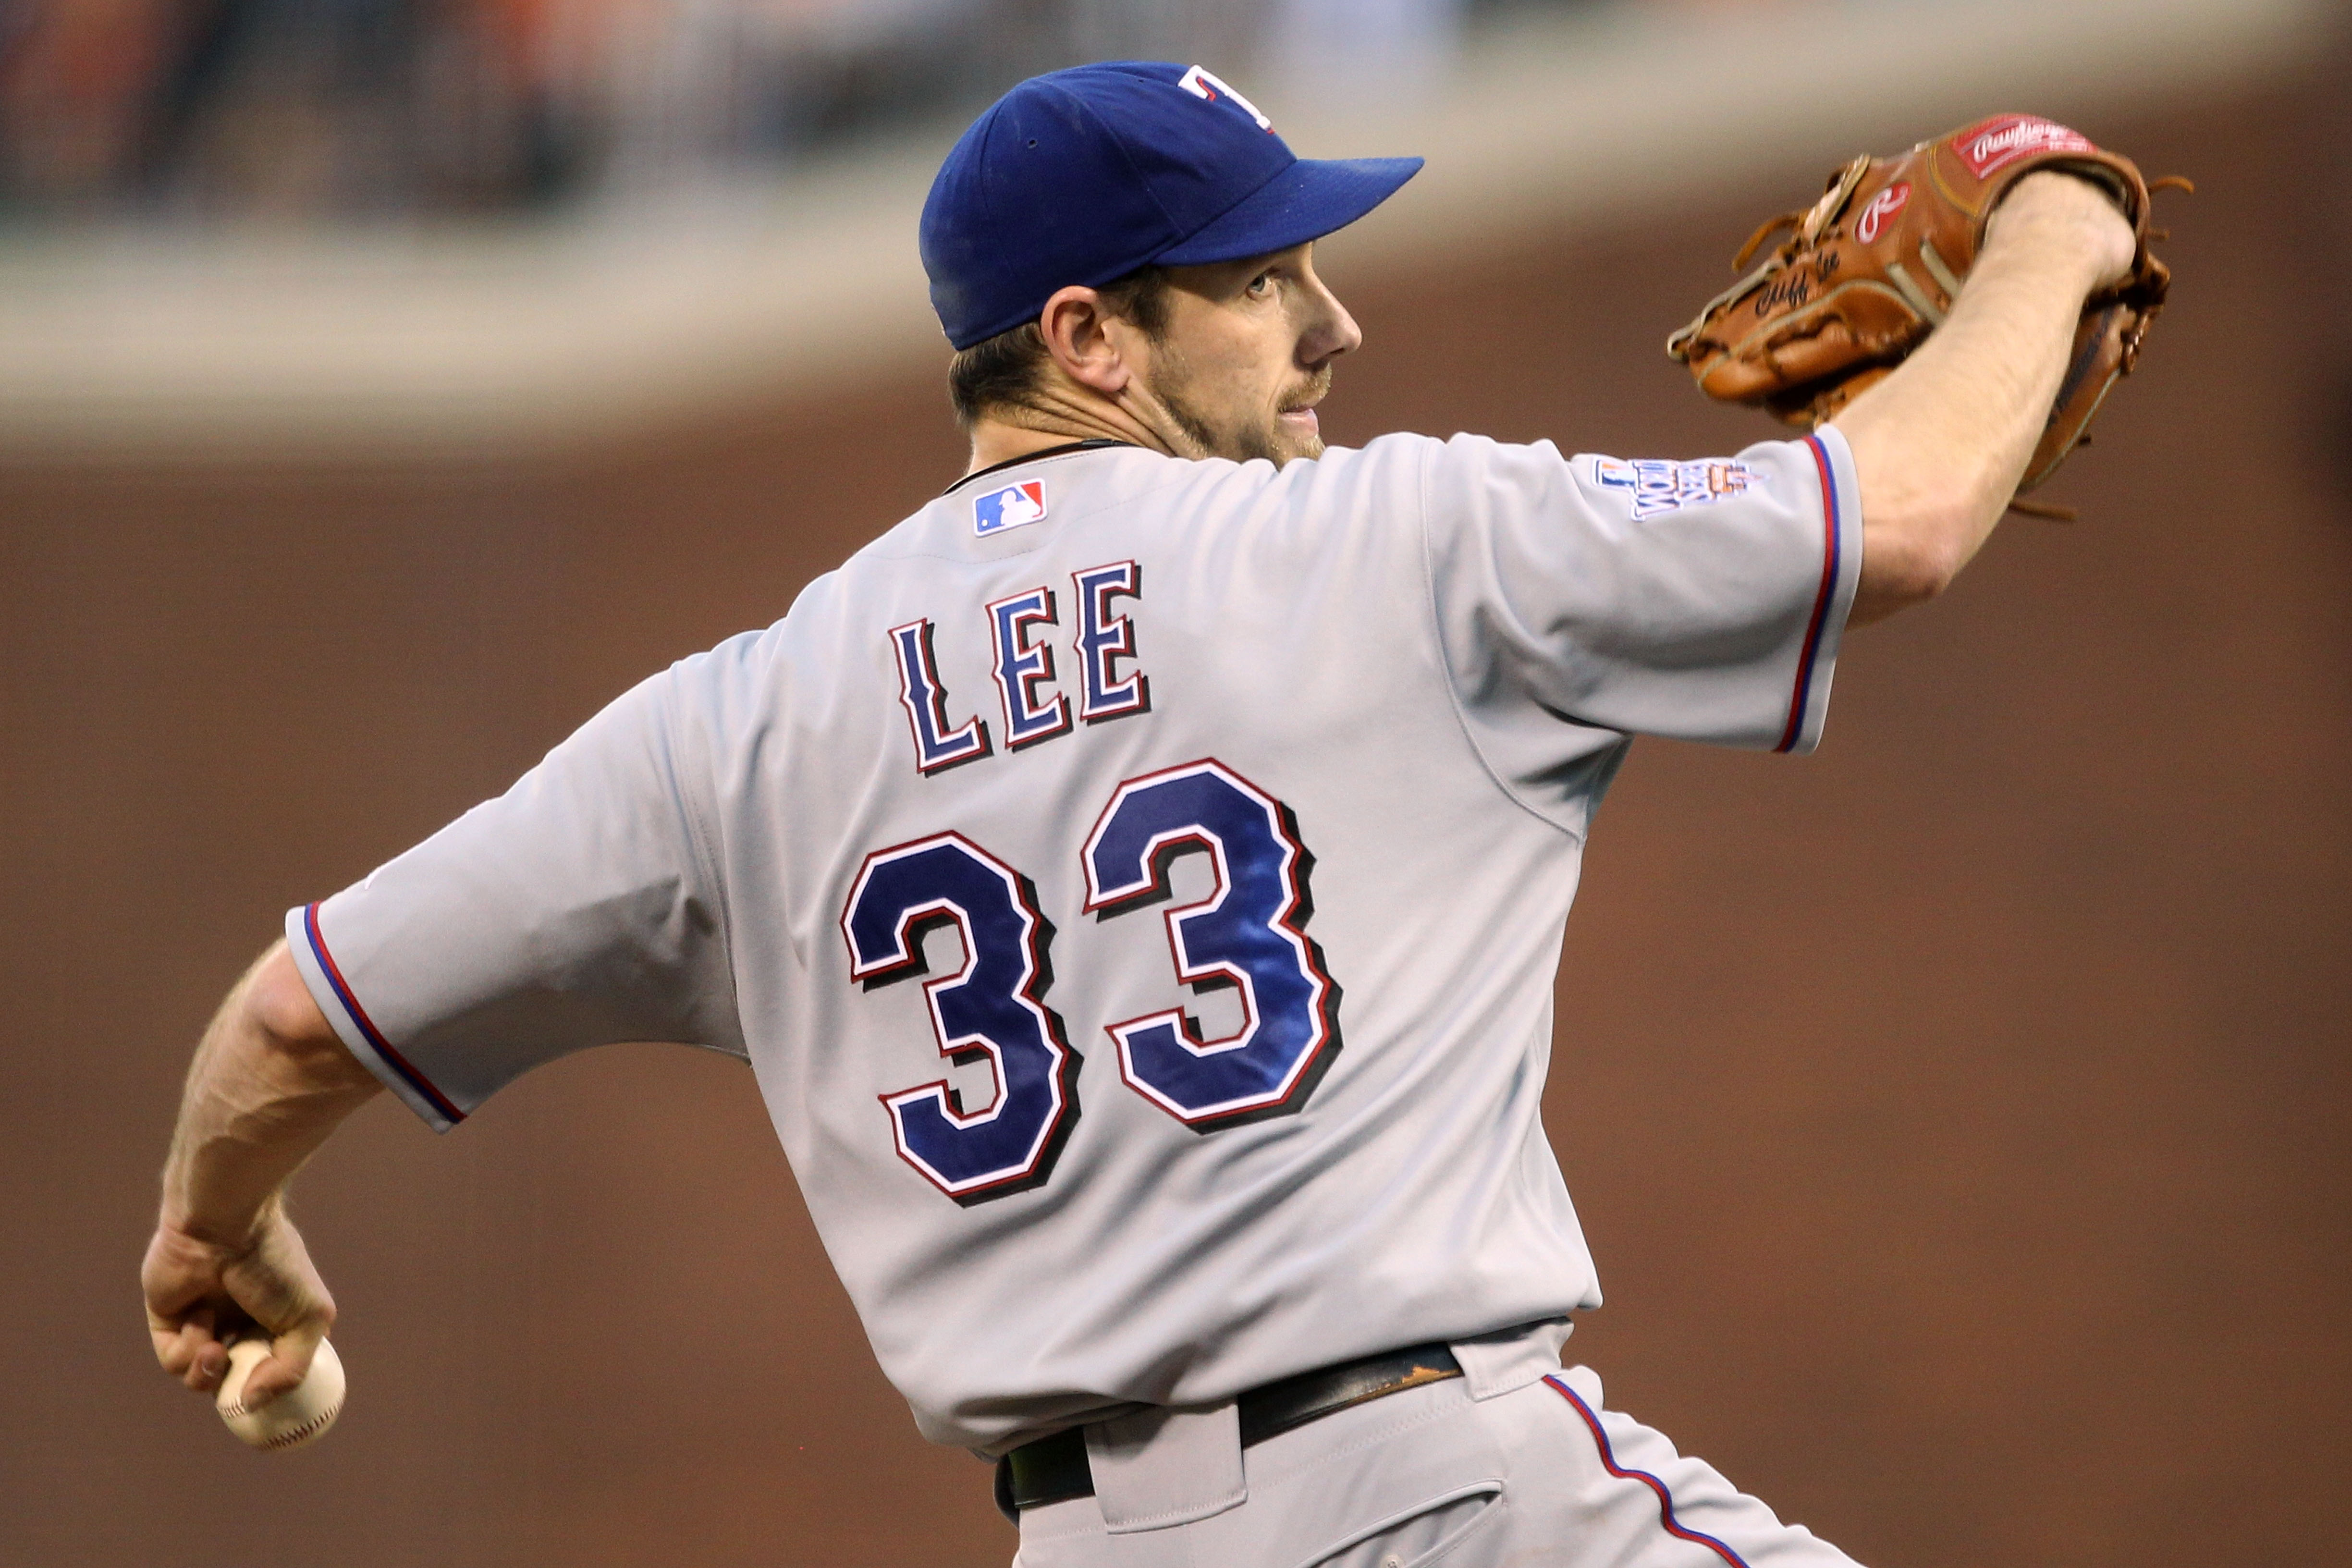 Cliff Lee Career Highlights/Tribute 